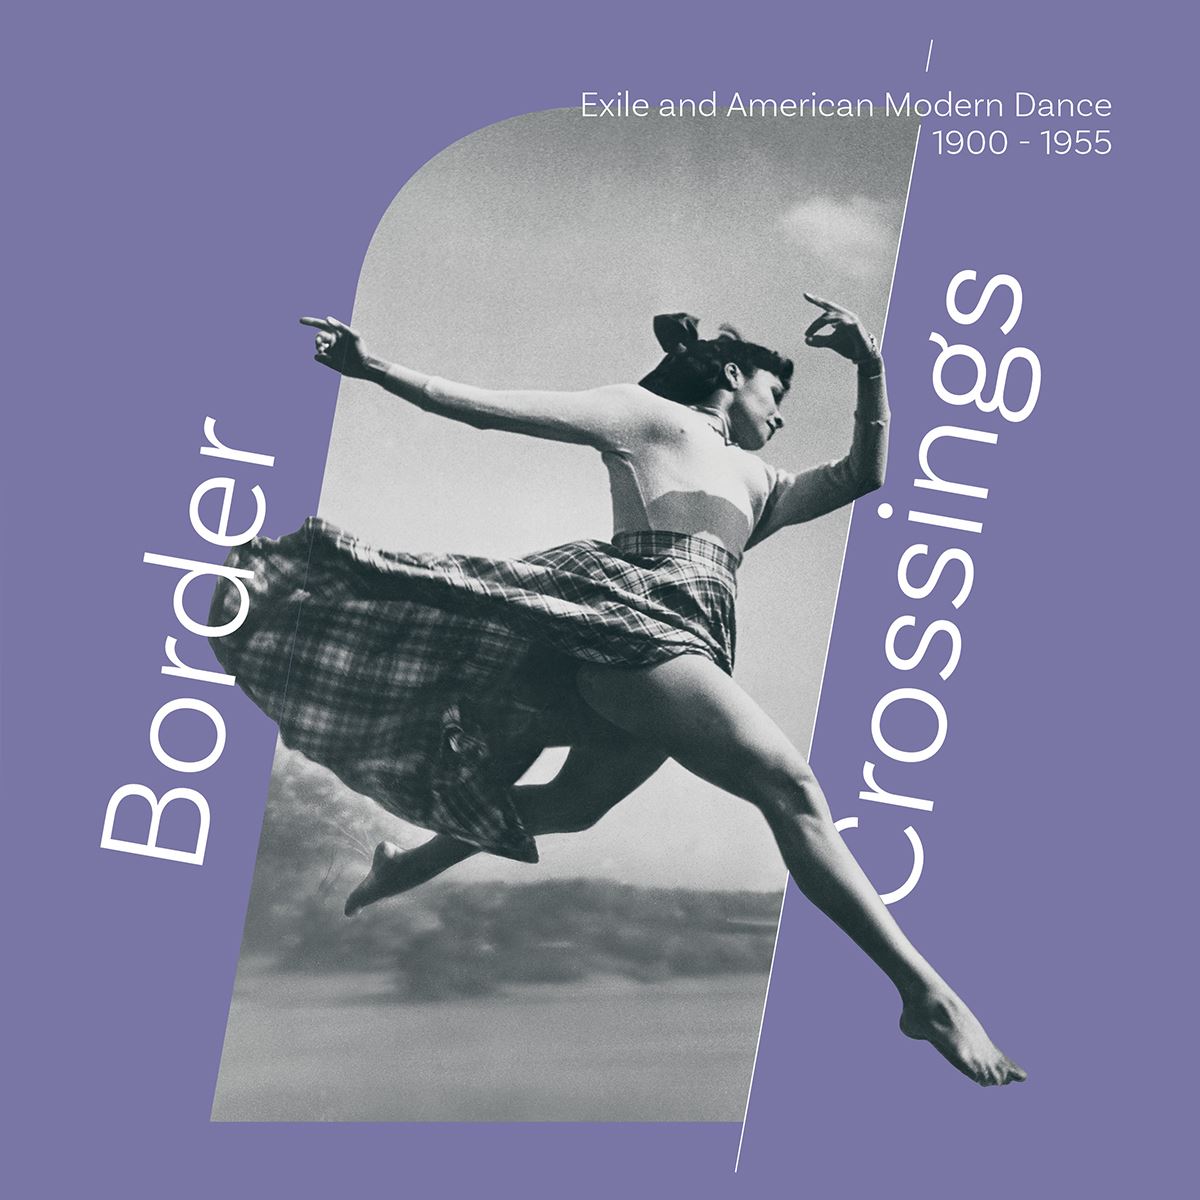 Promotional graphic for NYPL’s ‘Border Crossing’ exhibit, featuring a black-and-white image of a woman dancing against a purple background.